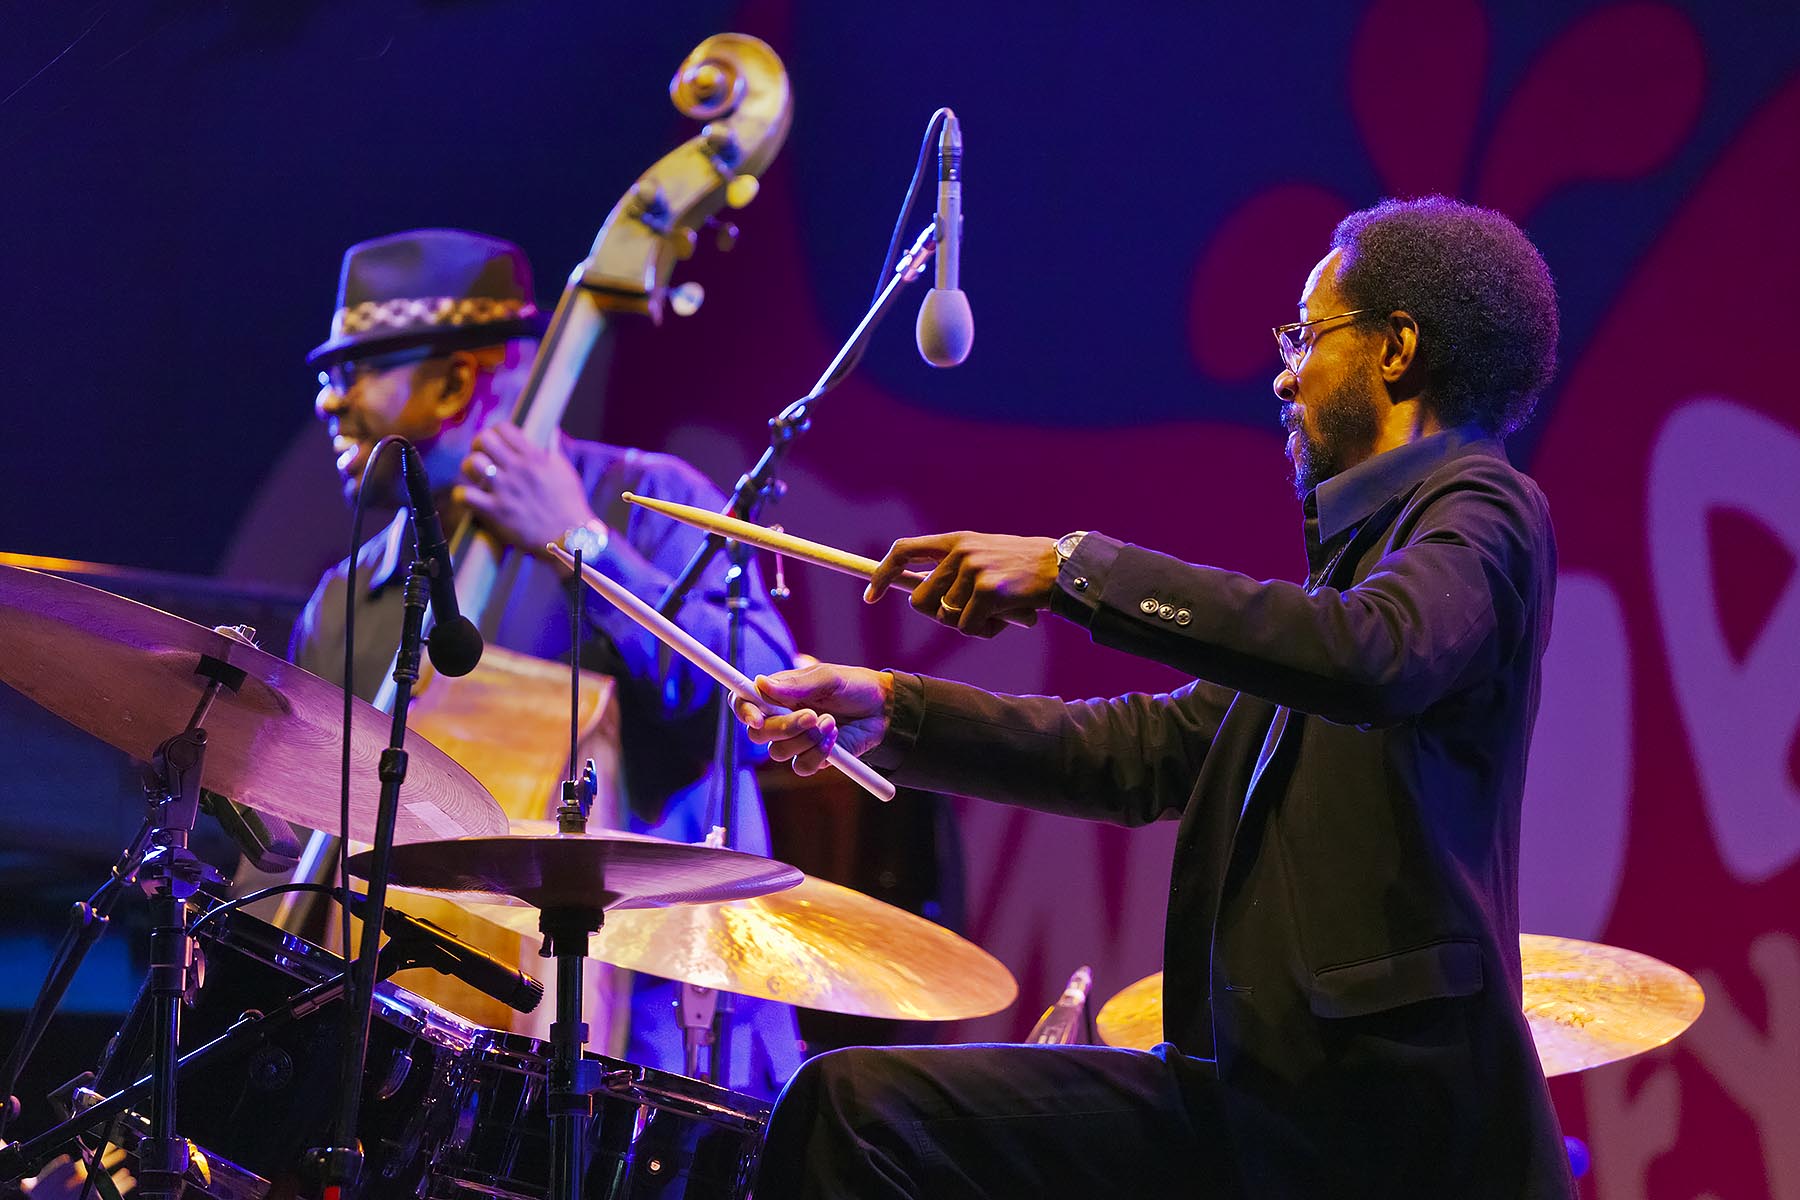 BRIAN BLADE on drums and CHRISTIAN MCBRIDE with Chic Corea performing at the 58th Monterey Jazz Festival - California